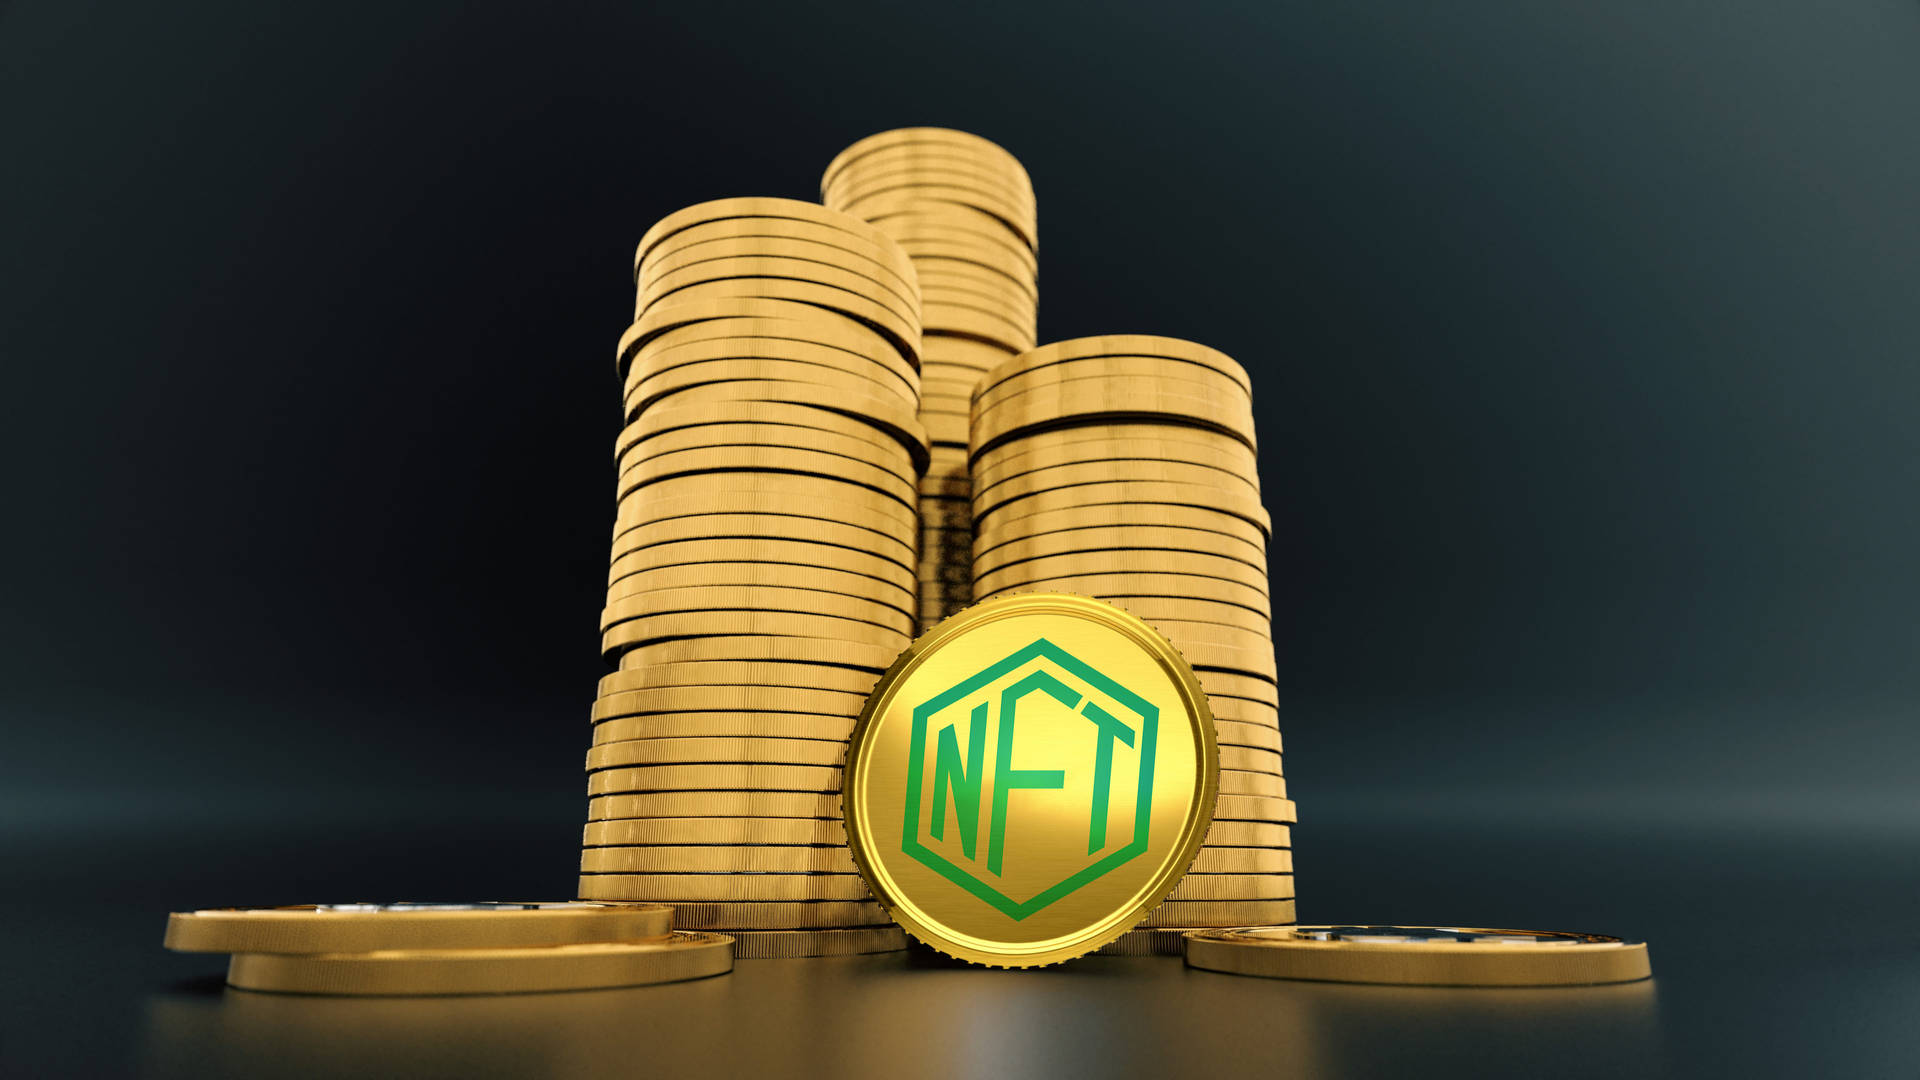 Nft Gold Coin Towers Background